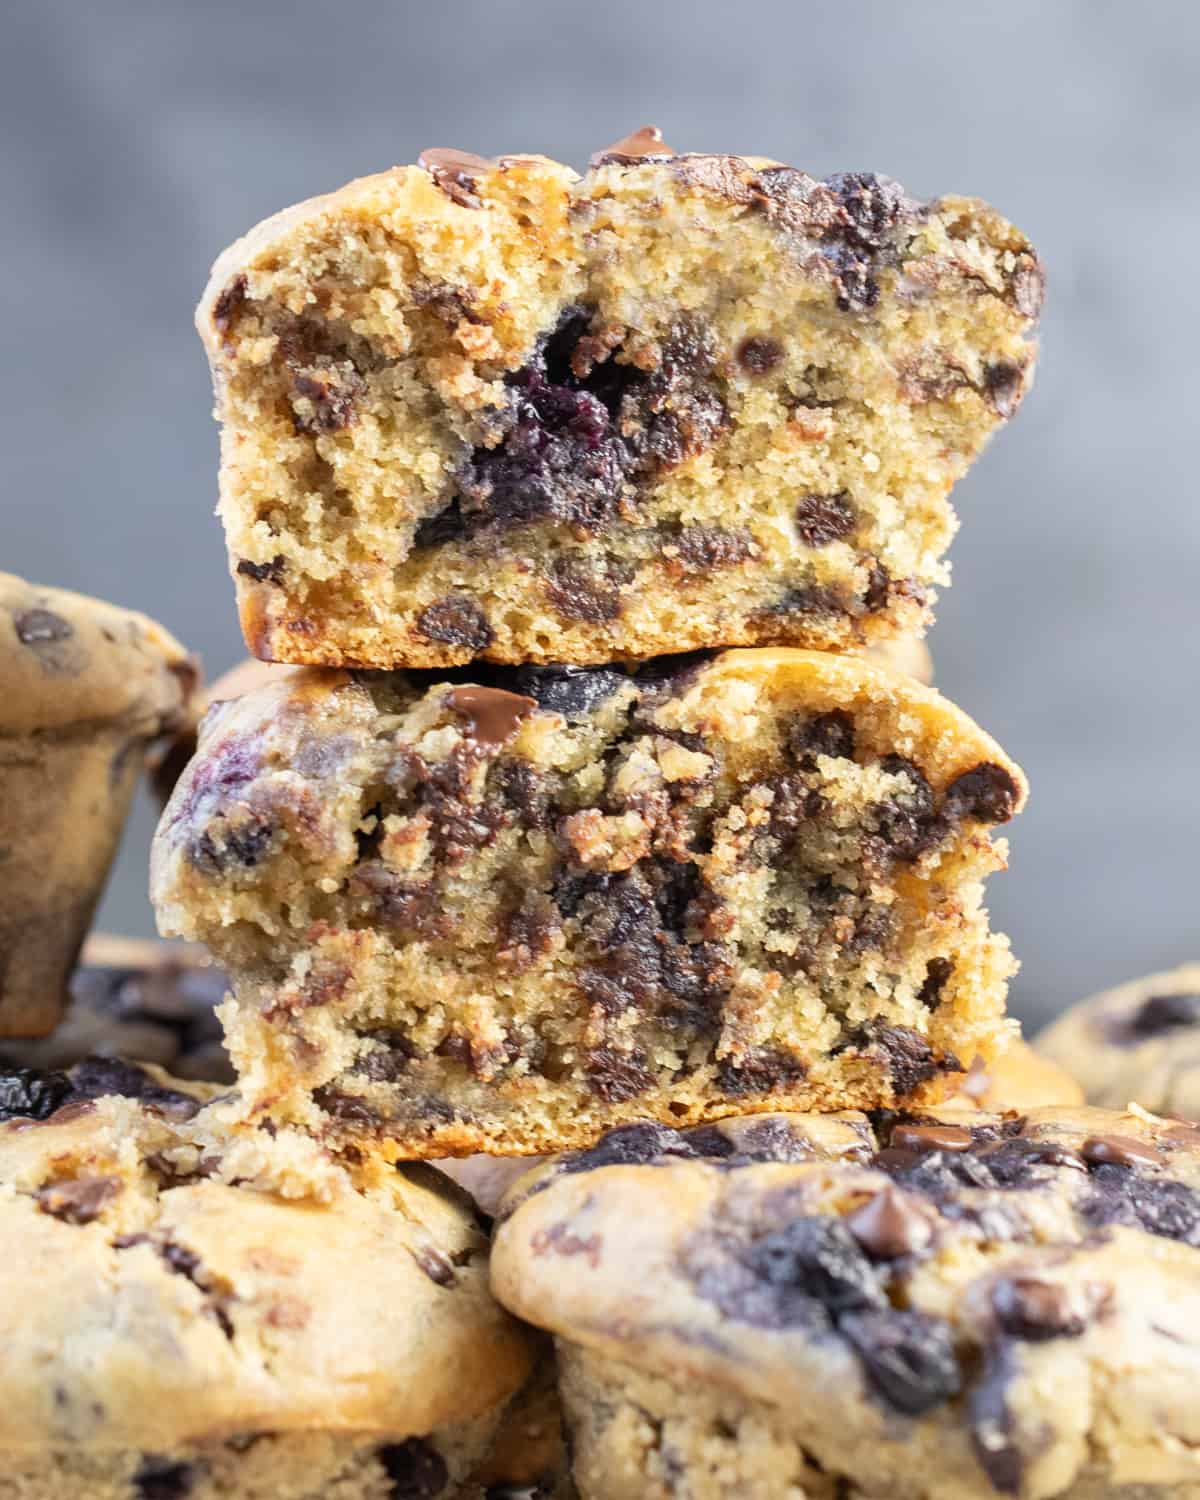 A muffin broken in half to showcase the moist interior with blueberries and chocolate chips, surrounded by whole muffins.